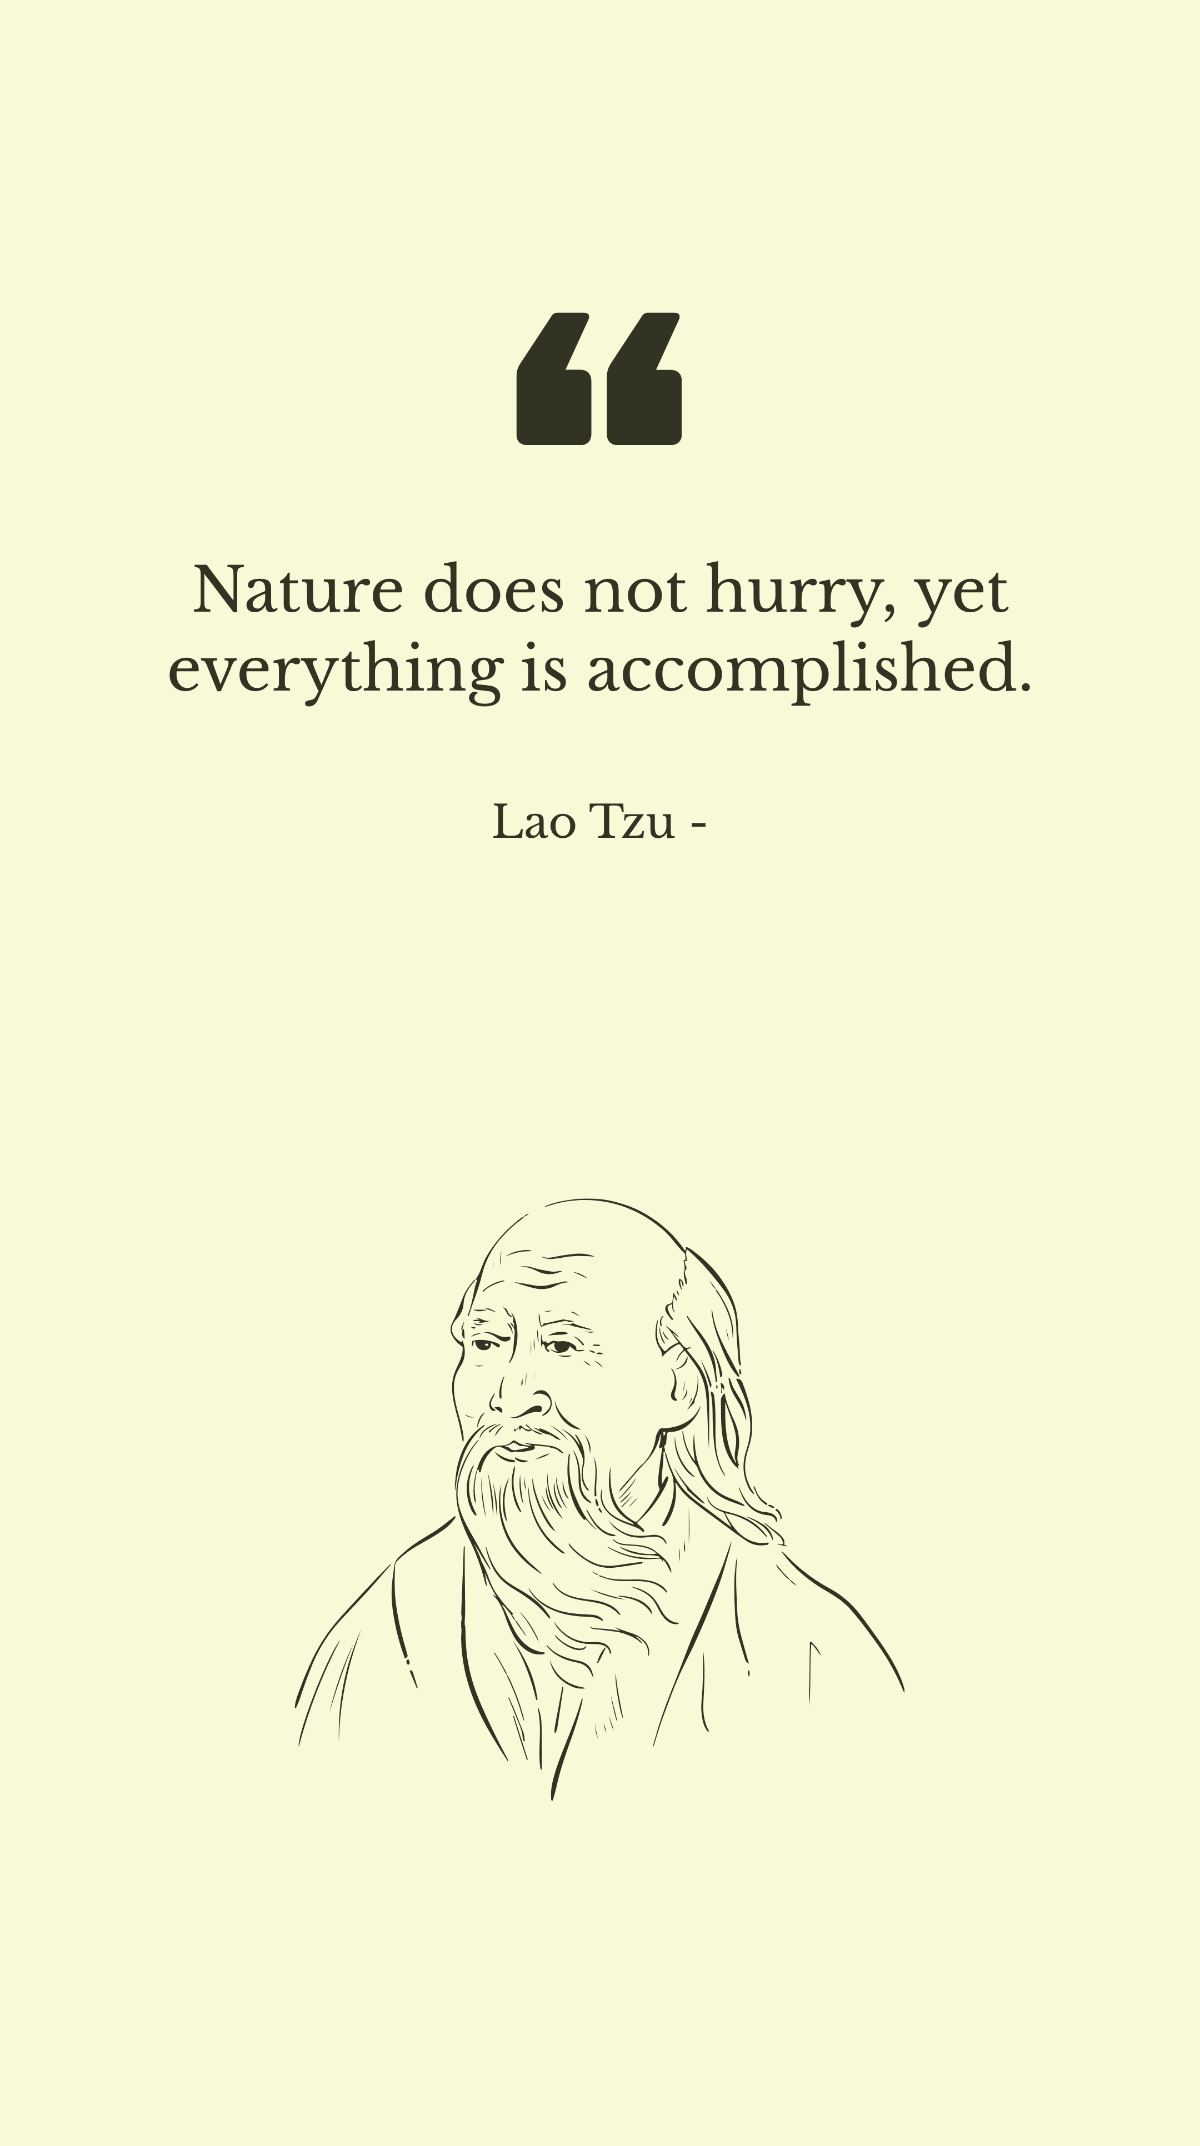 Free Lao Tzu - Nature does not hurry, yet everything is accomplished. Template